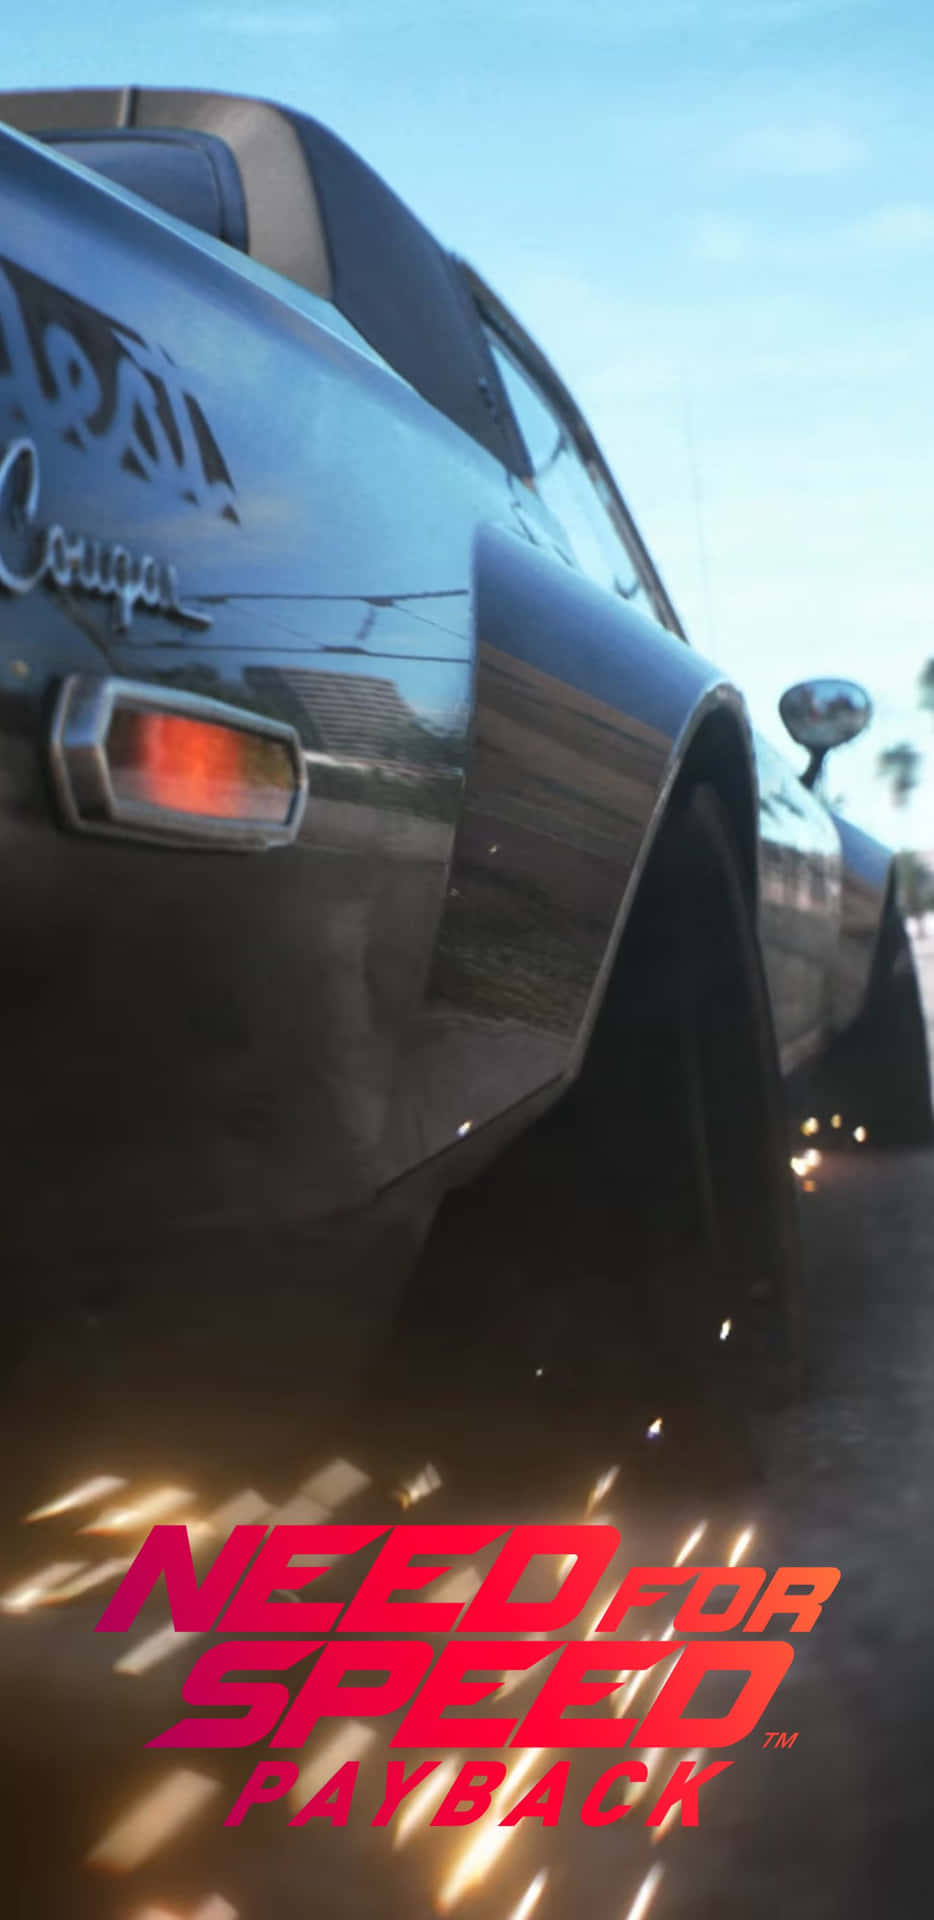 Corriavanti In Need For Speed Payback Sul Pixel 3xl